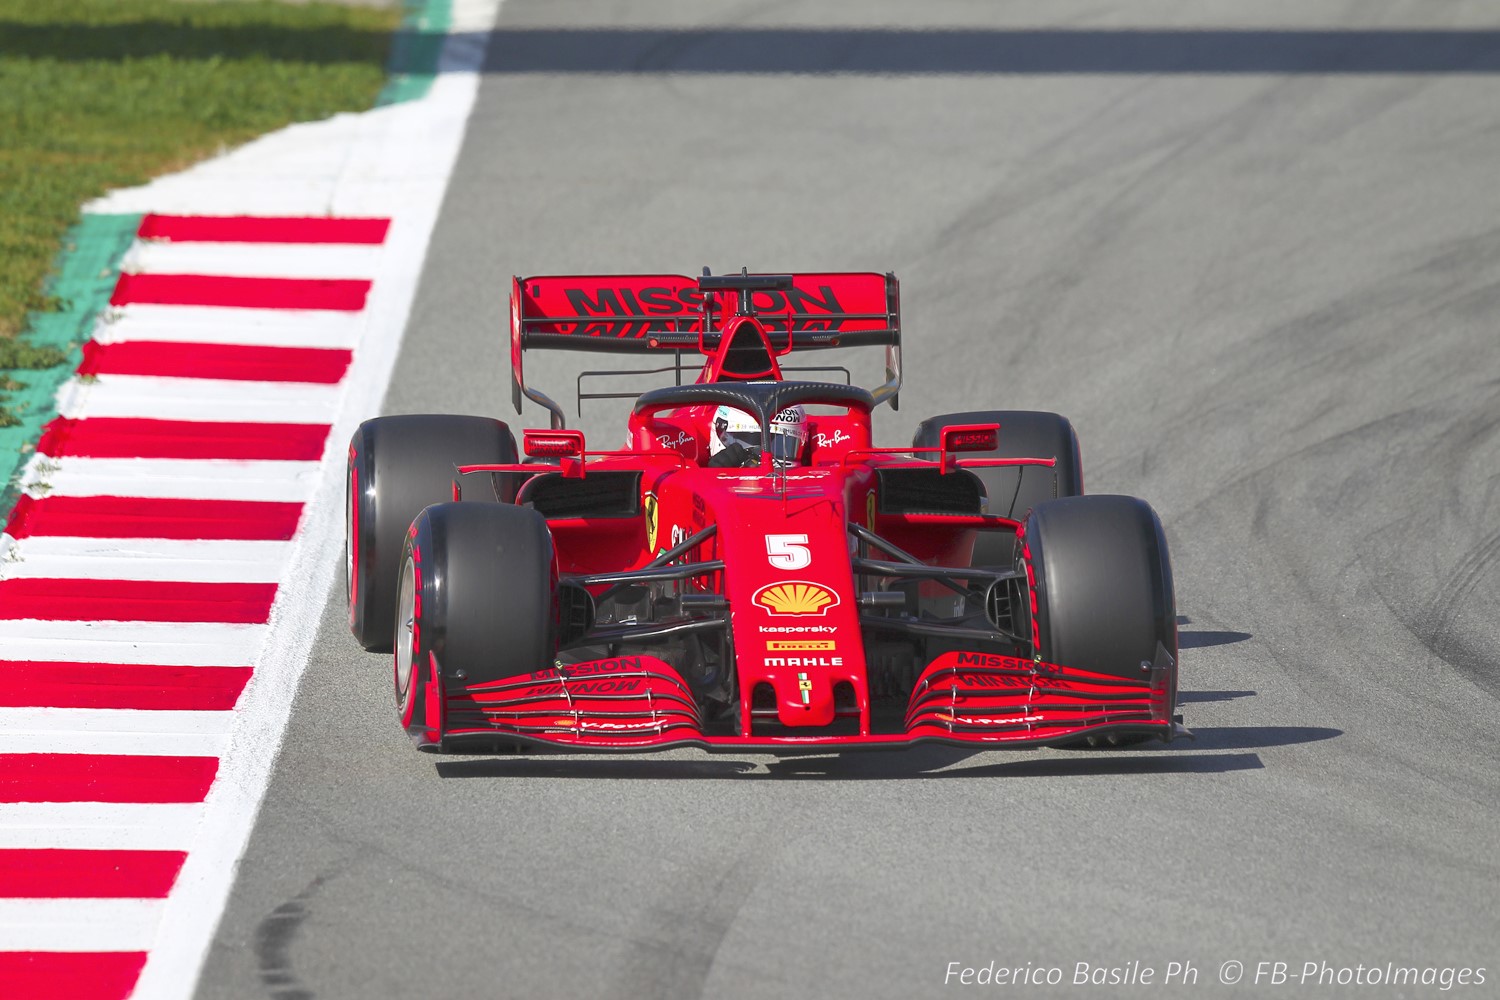 The new Ferrari is slow down the straights - the front nose looks like a boat pushing a ton of air compared to the Mercedes and the Racing Point 'Pink Mercedes.'